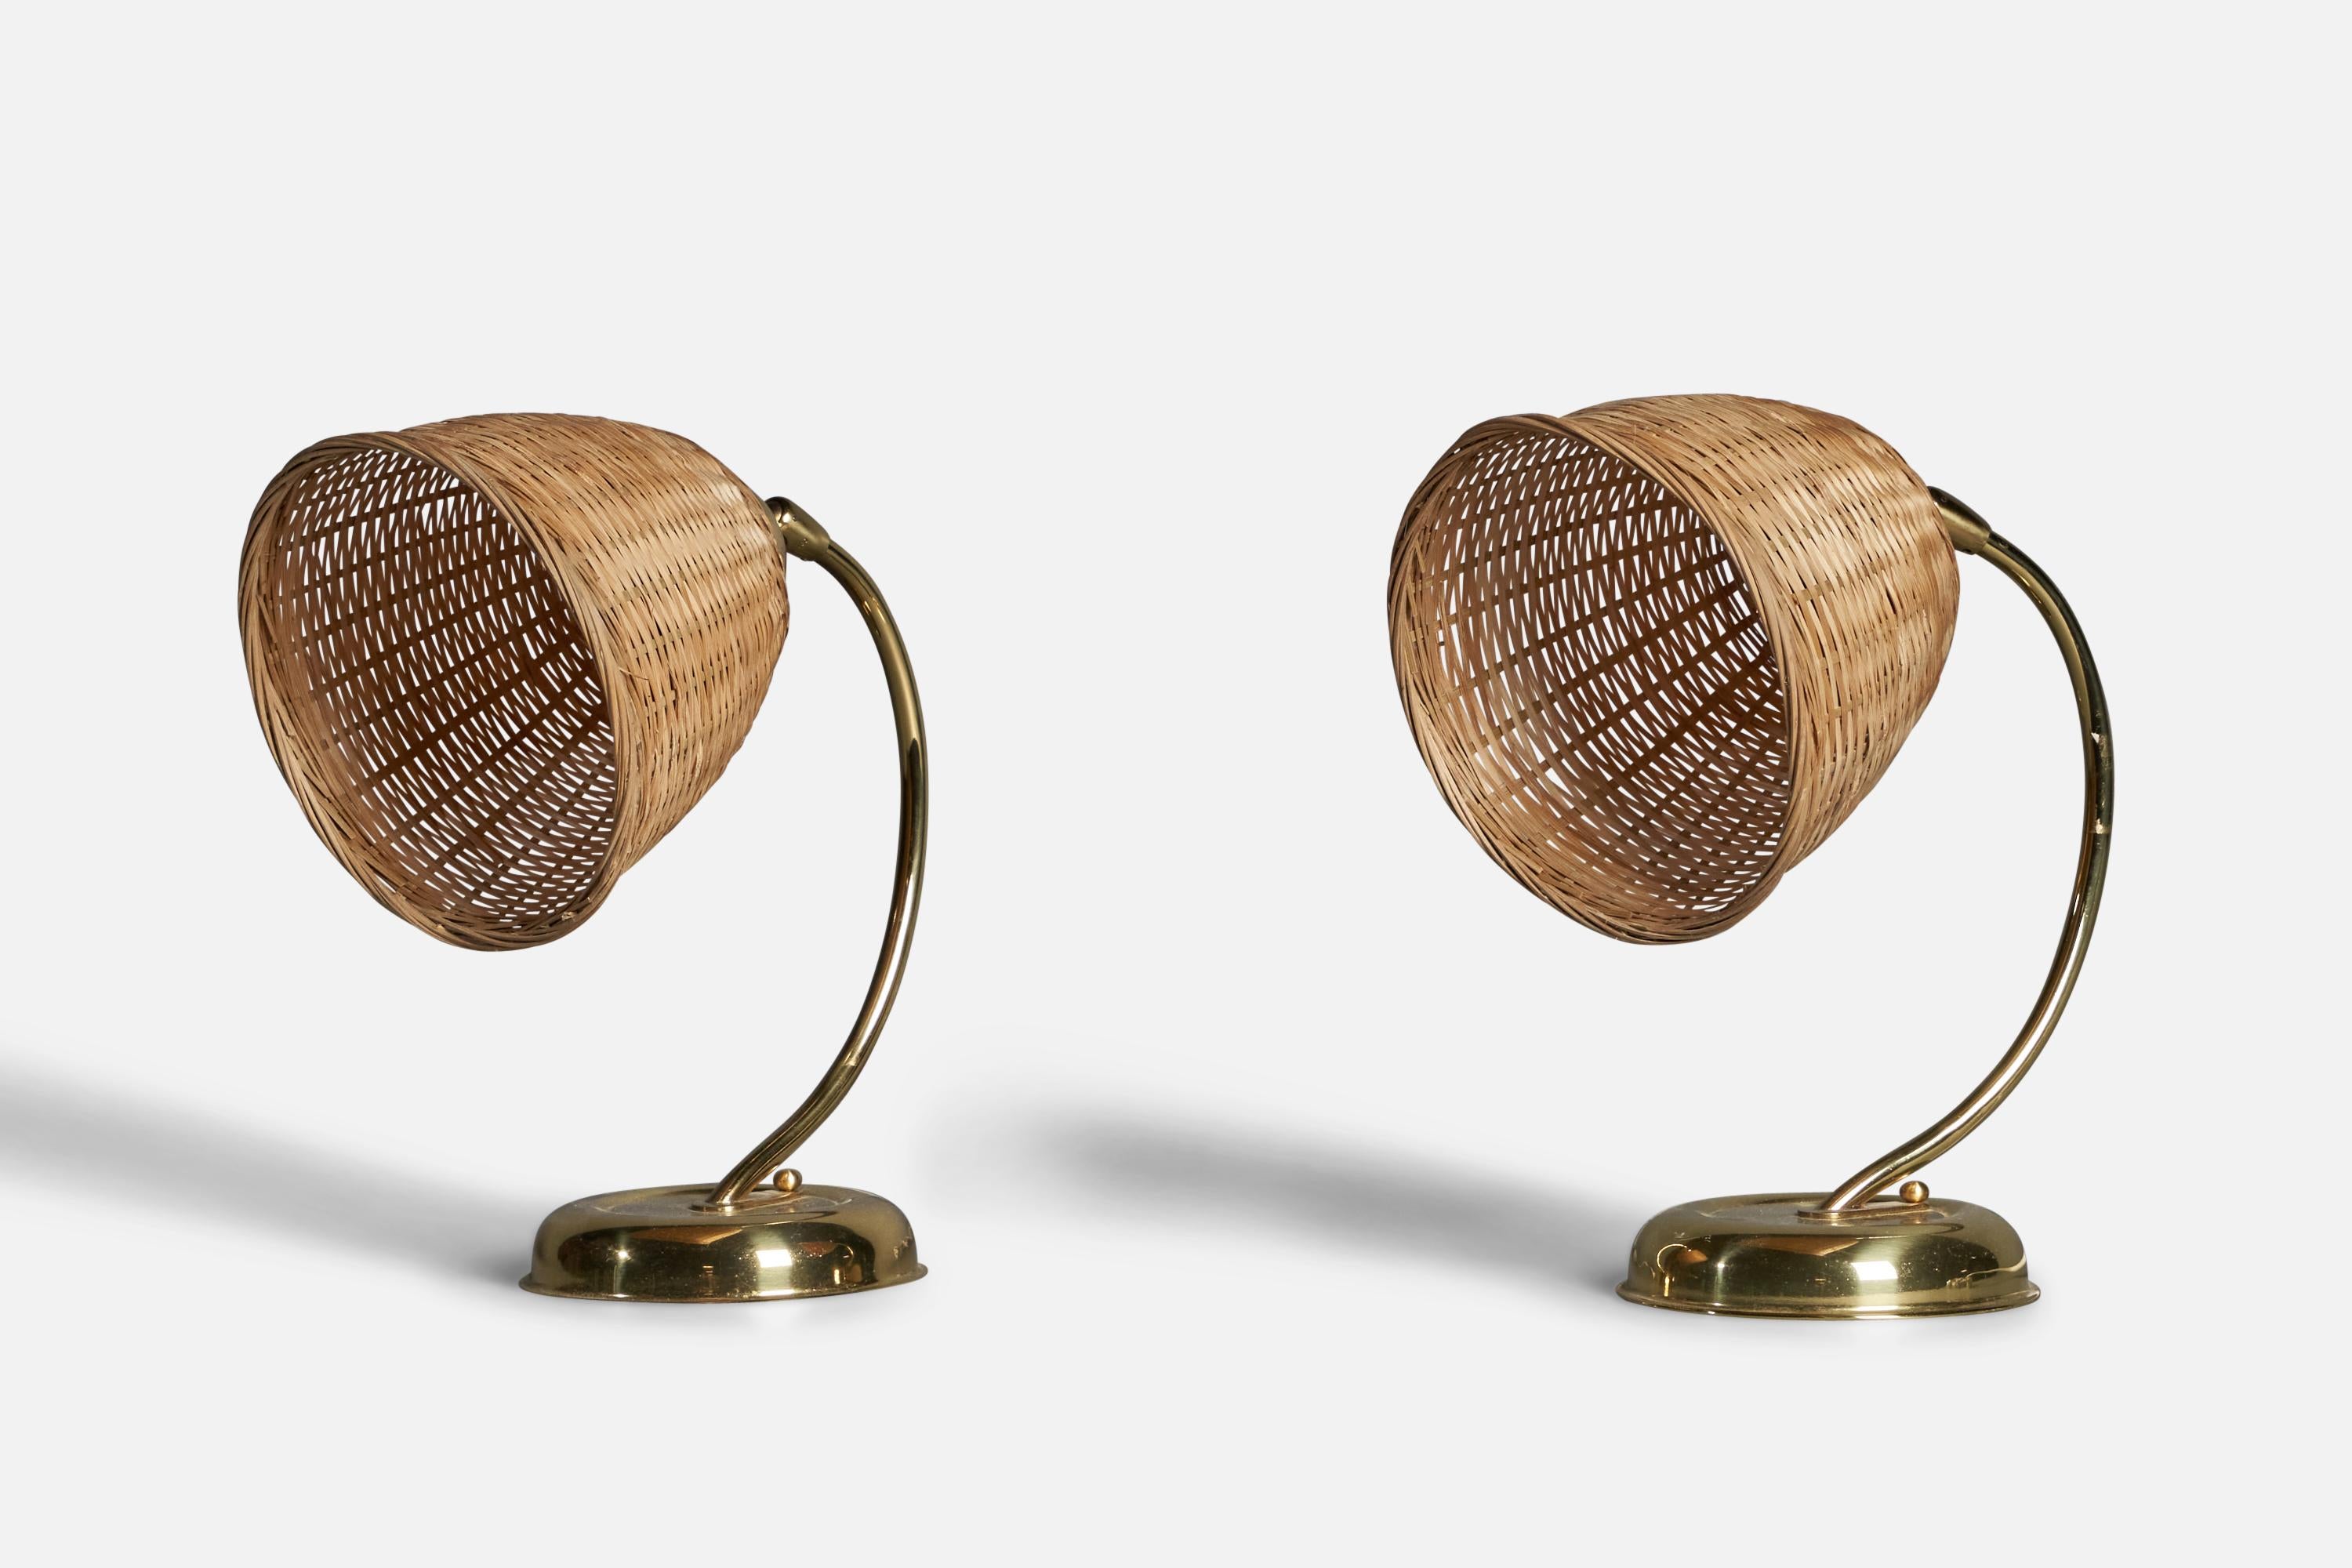 A pair of brass and rattan table lamps, designed and produced in Sweden, c. 1970s.

Overall Dimensions (inches): 10.5